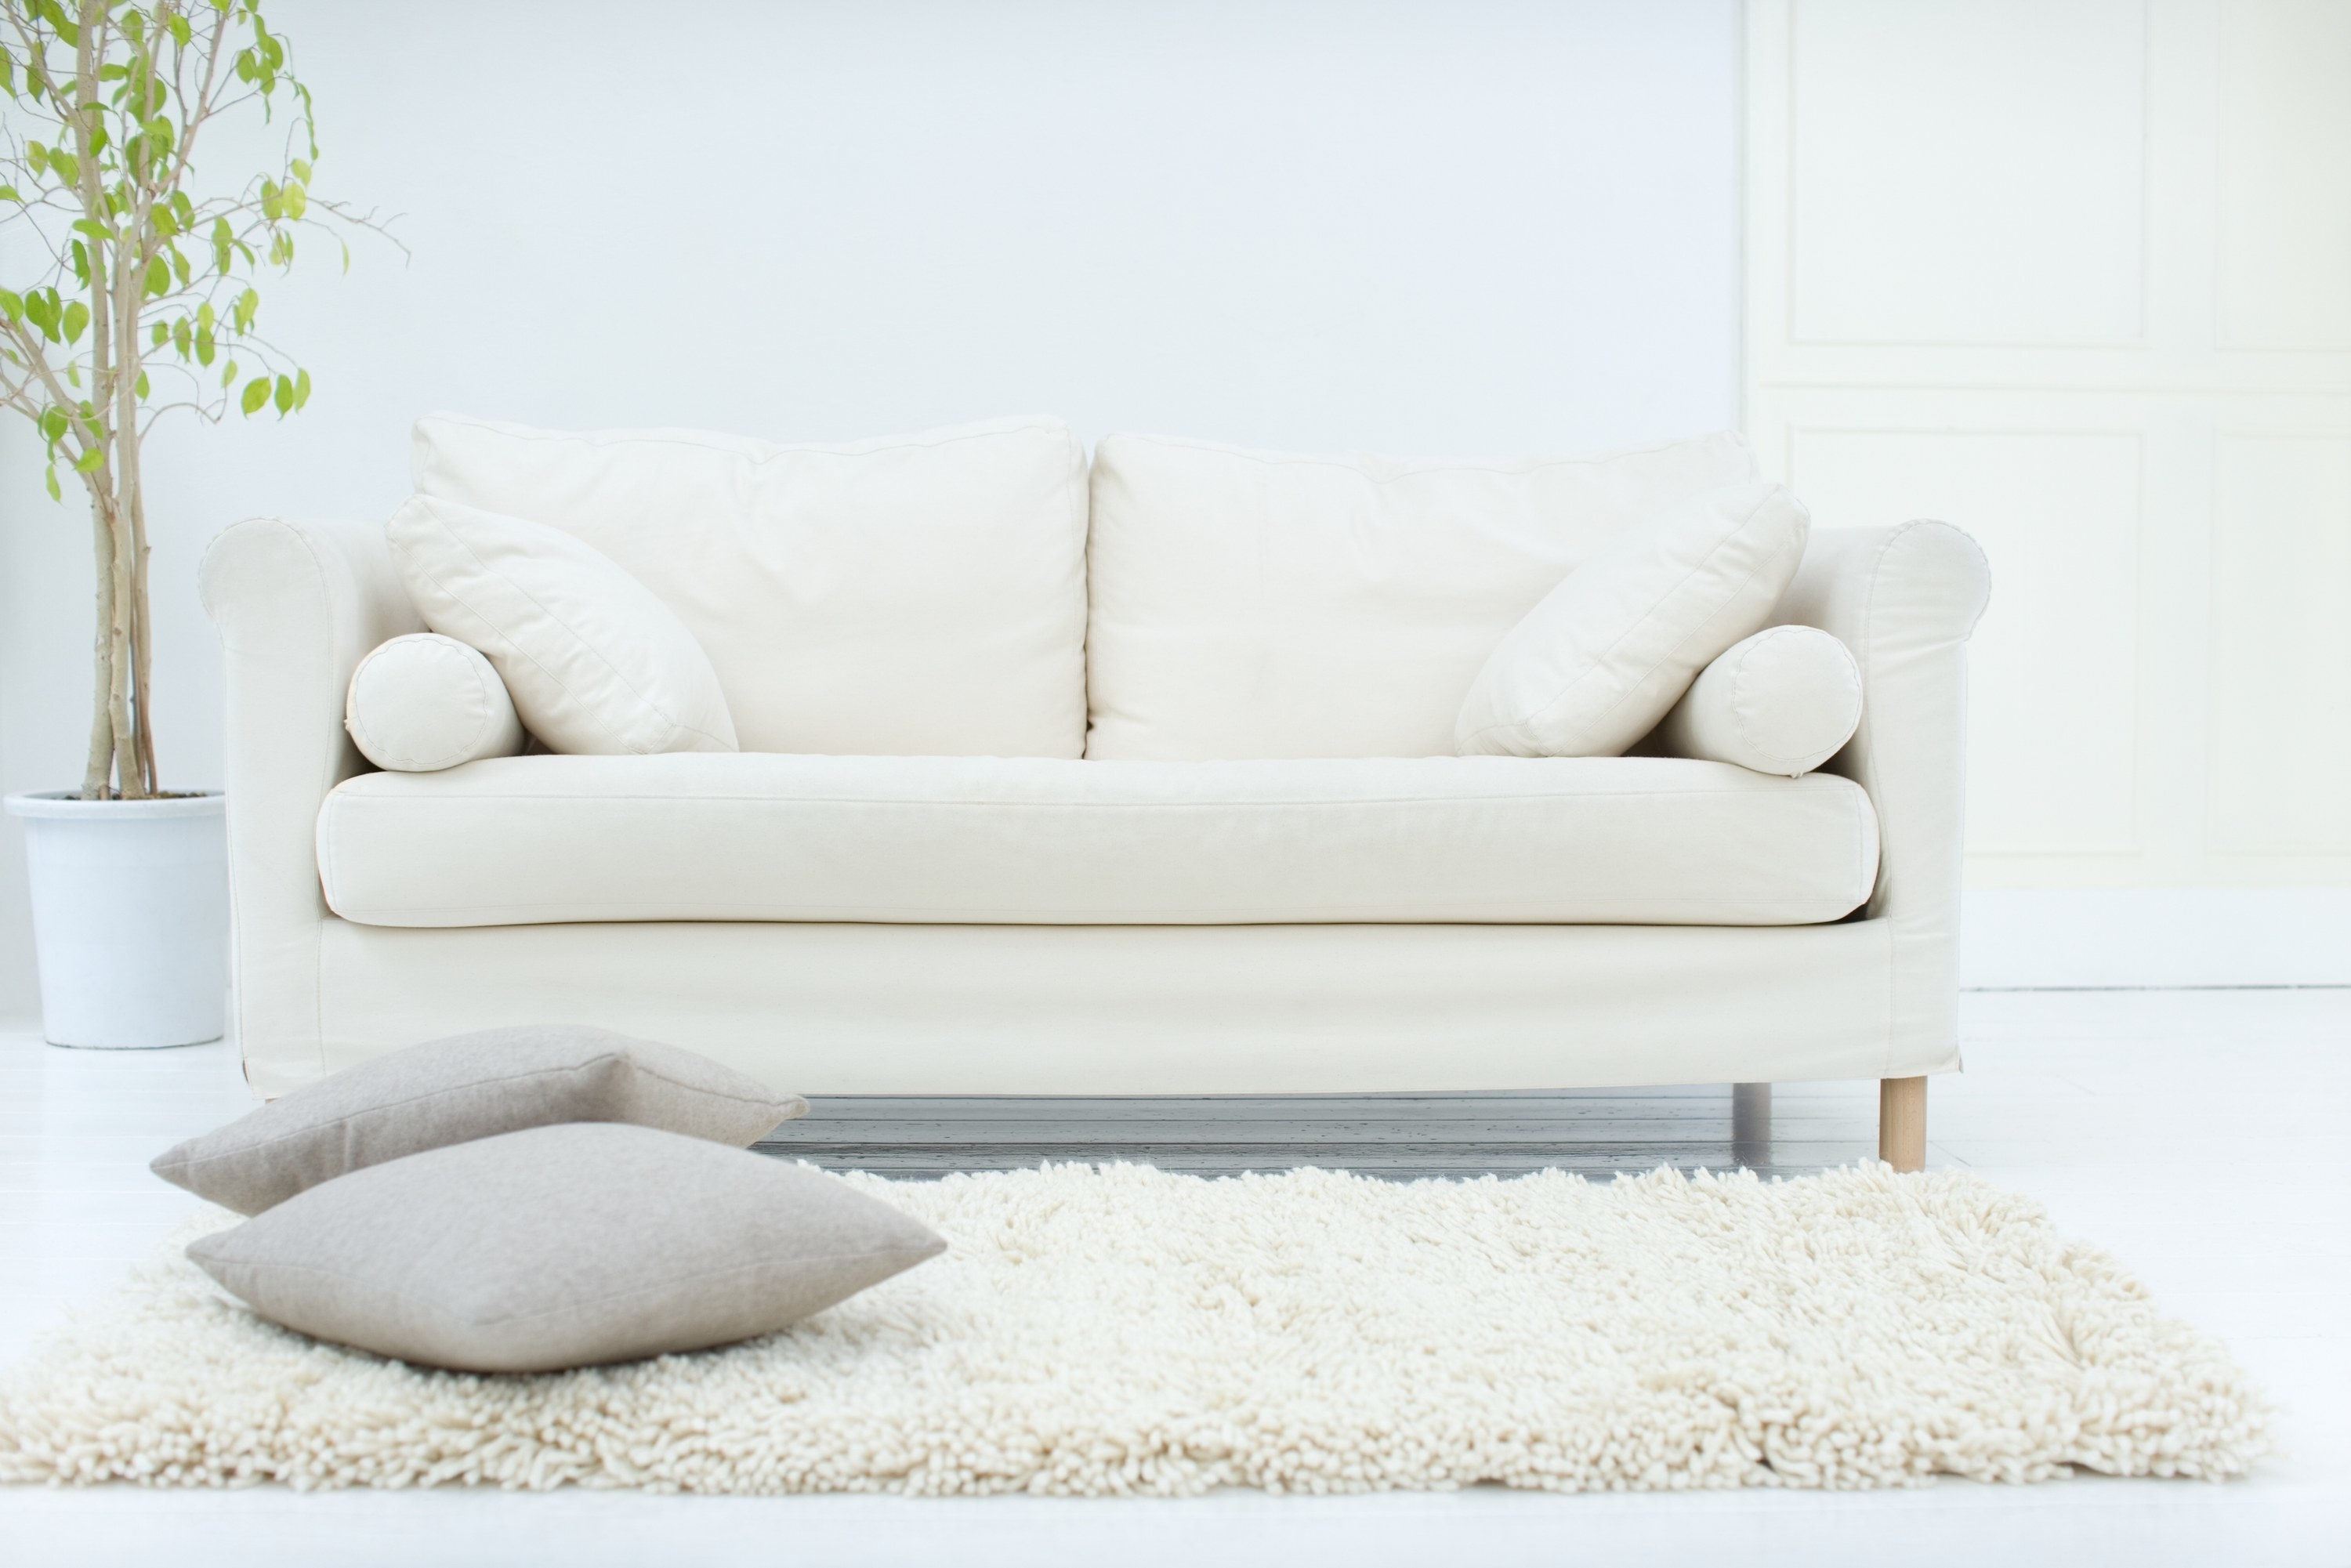 A white couch, set on a white rug with white walls and flooring